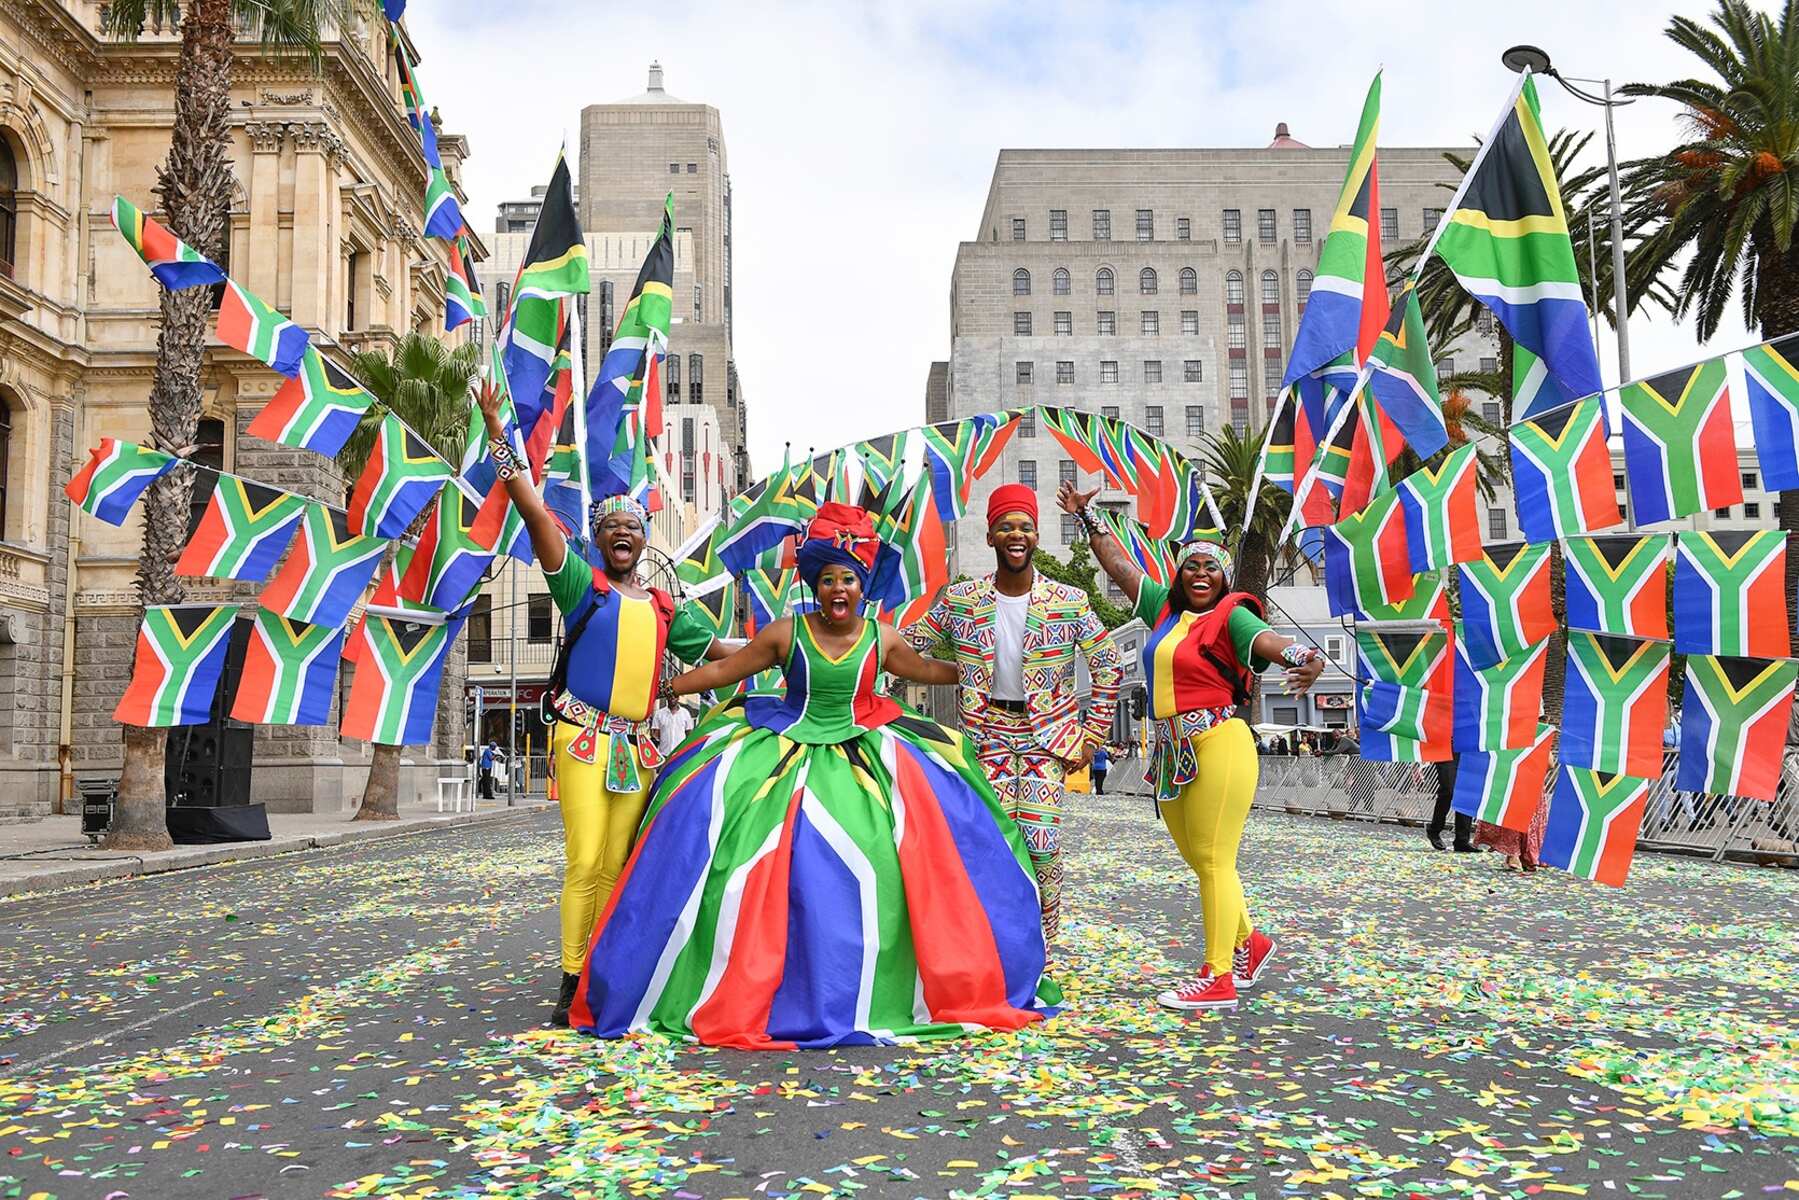 18 Facts About Rio Carnival 